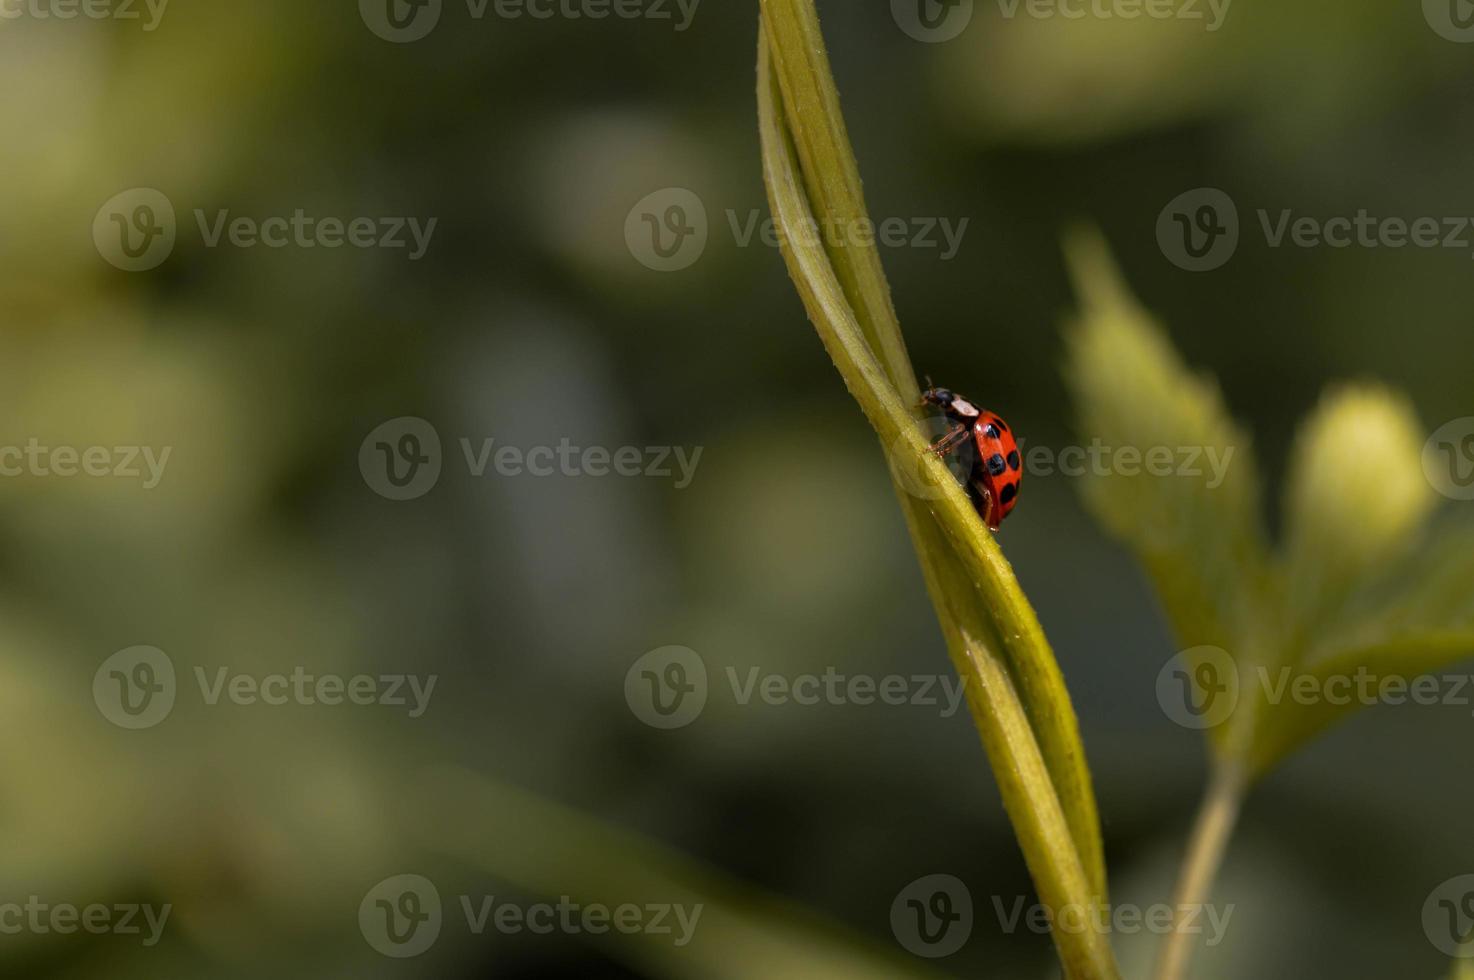 Ladybug on a plant, red bug with black spots photo